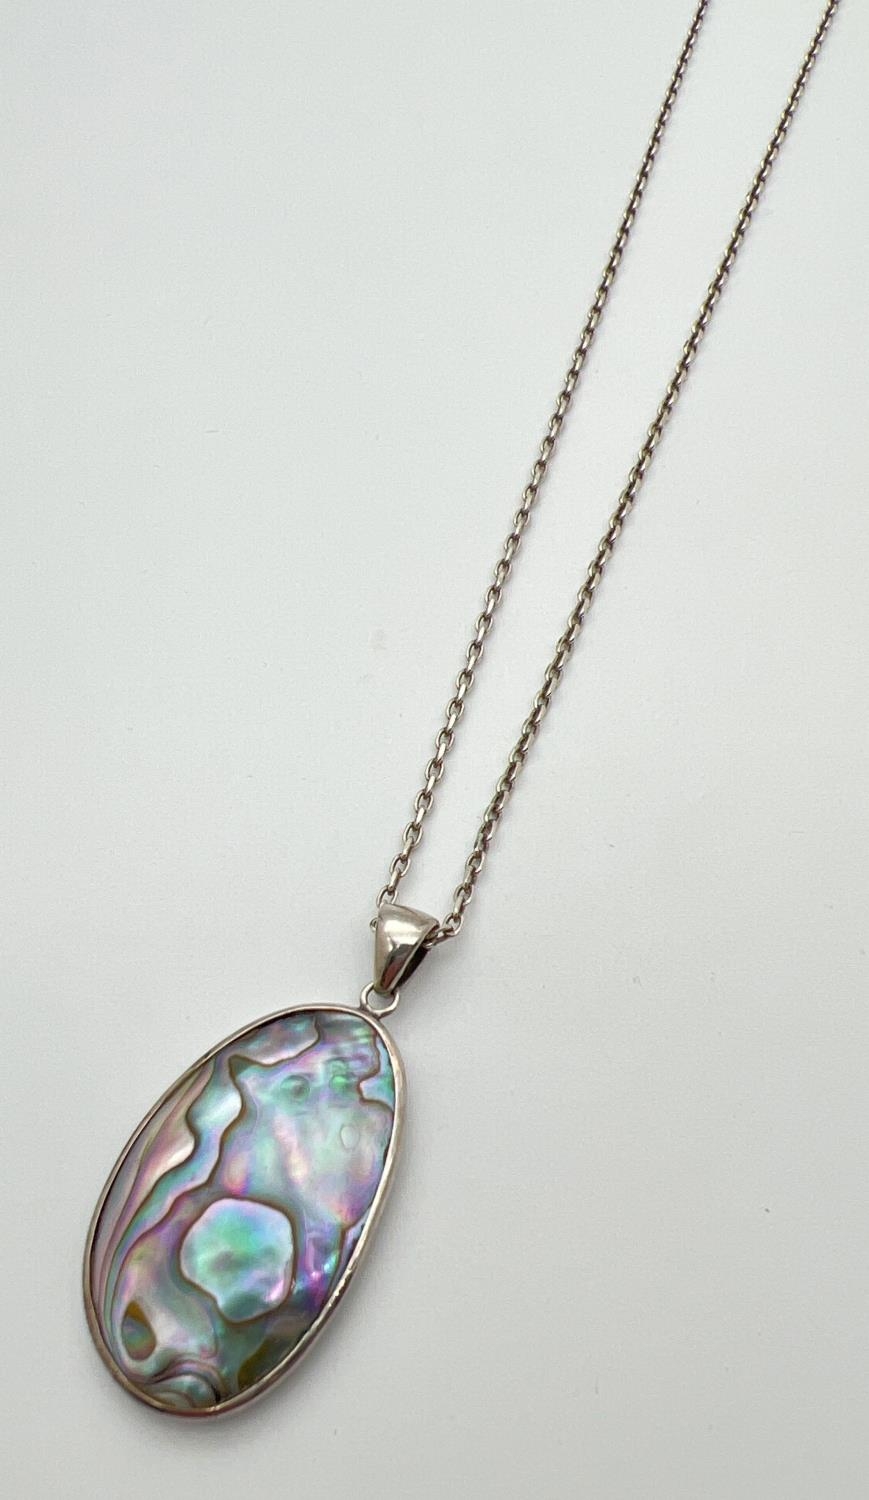 An oval shaped Abalone shell pendant set in silver, on a 20" belcher chain with spring ring clasp.